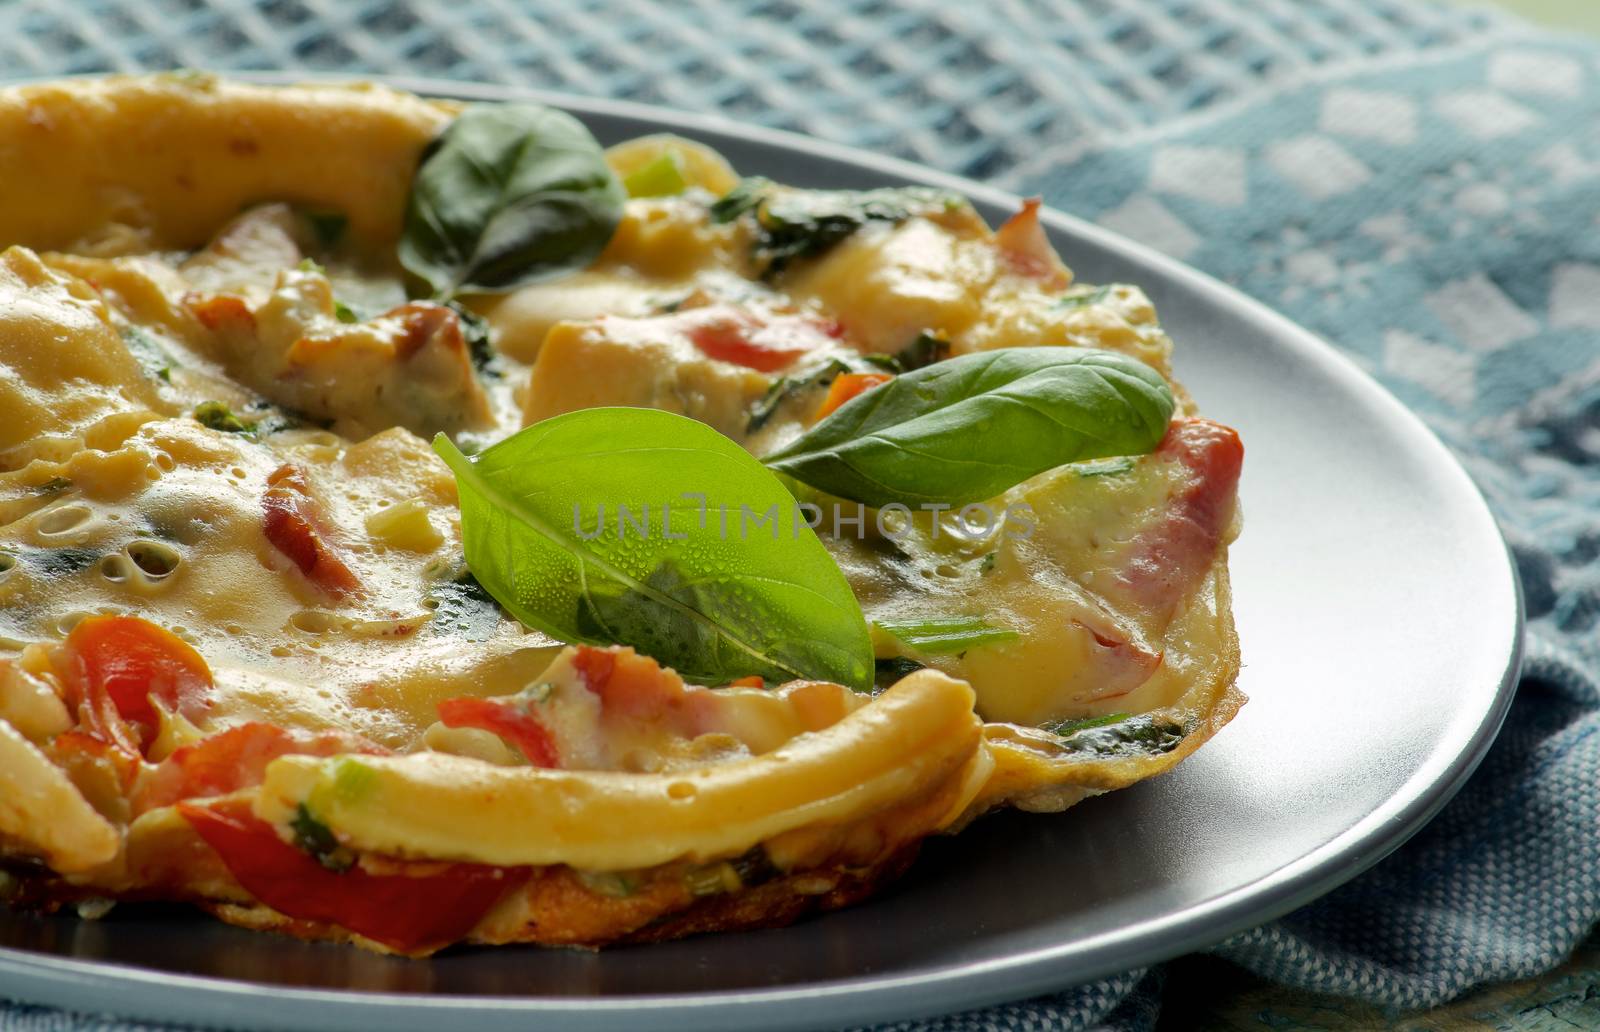 Fluffy Omelet with Vegetables by zhekos